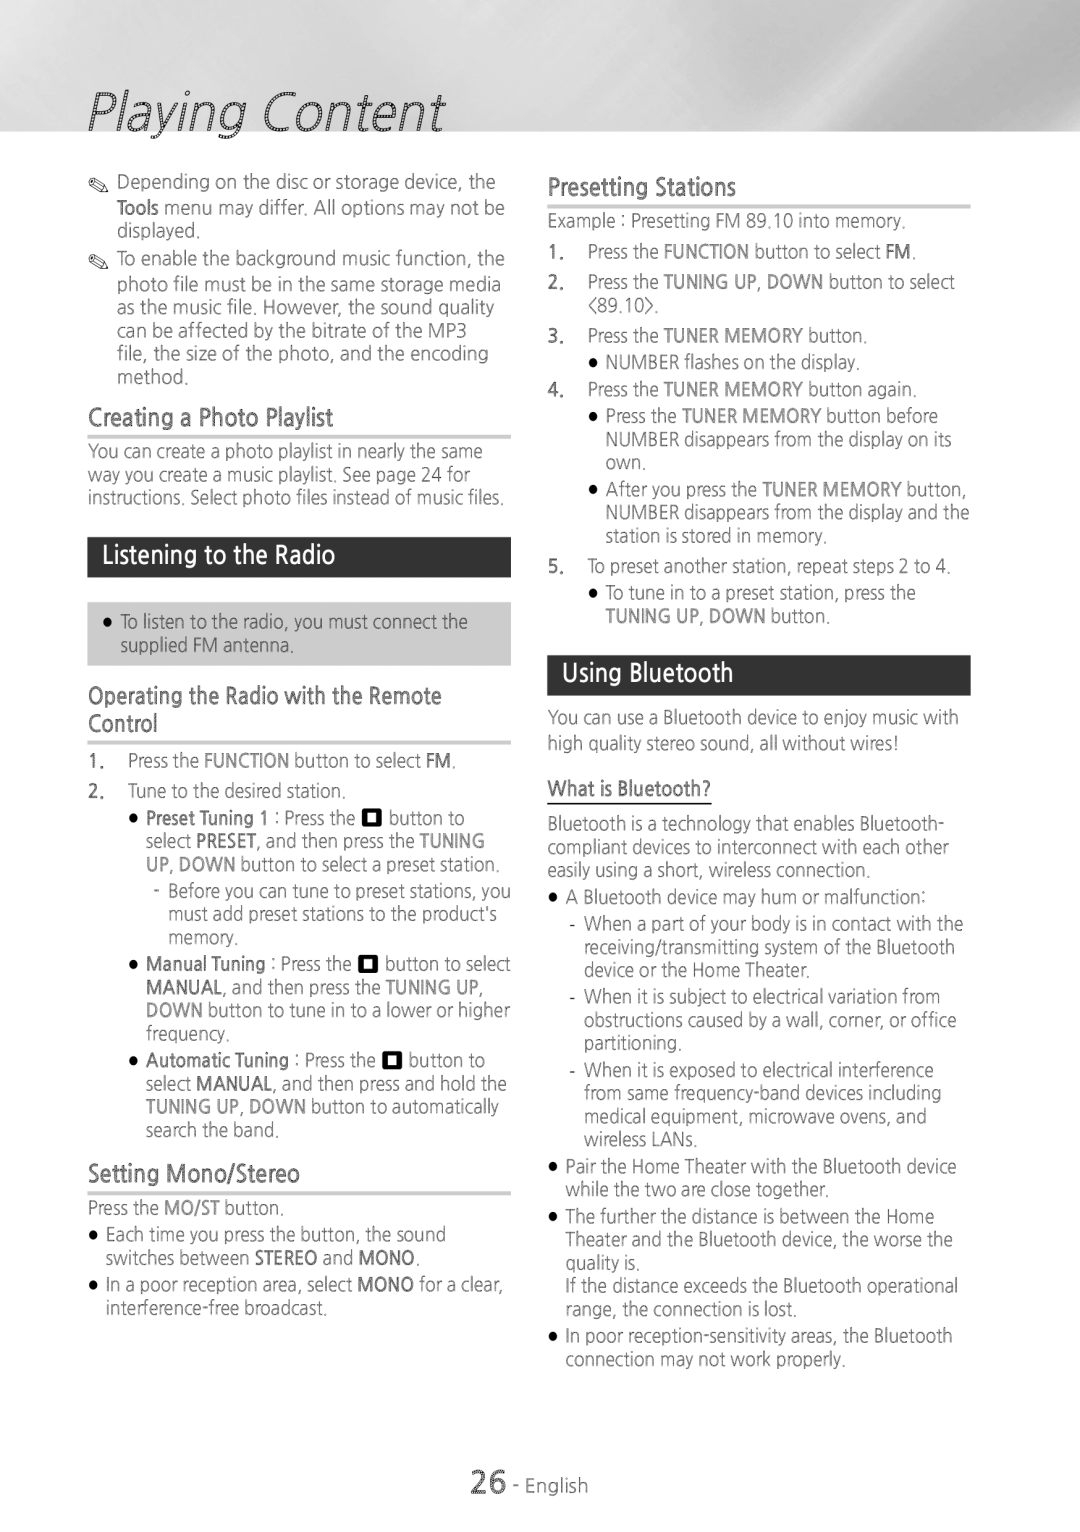 Samsung HT-H4500 user manual Creating a Photo Playlist, Listening to the Radio, Setting Mono/Stereo, Presetting Stations 